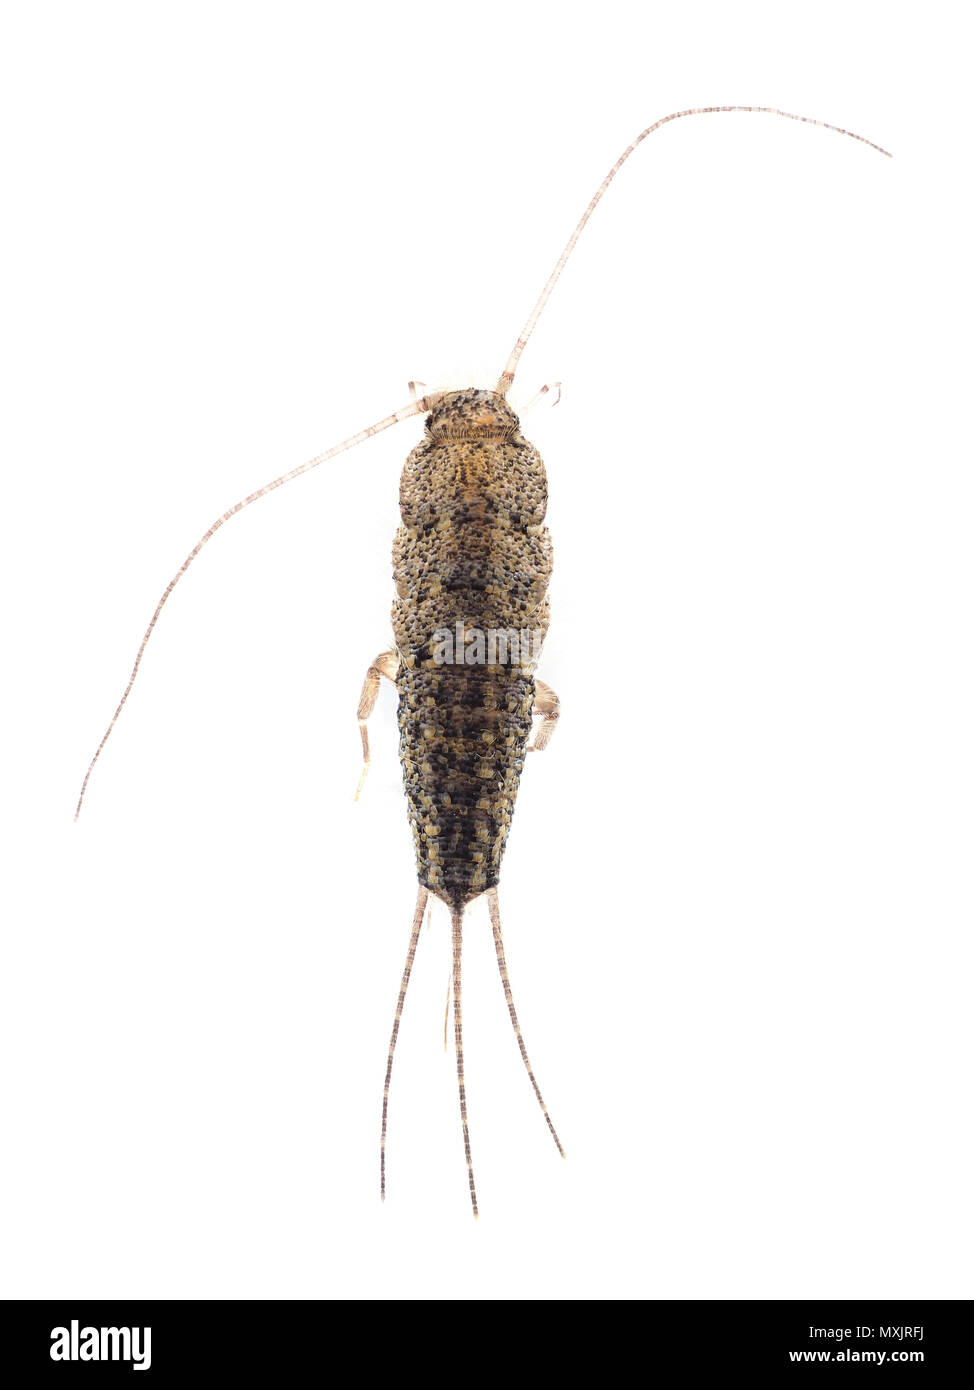 Four-lined silverfish (Ctenolepisma lineata), dorsal view Stock Photo